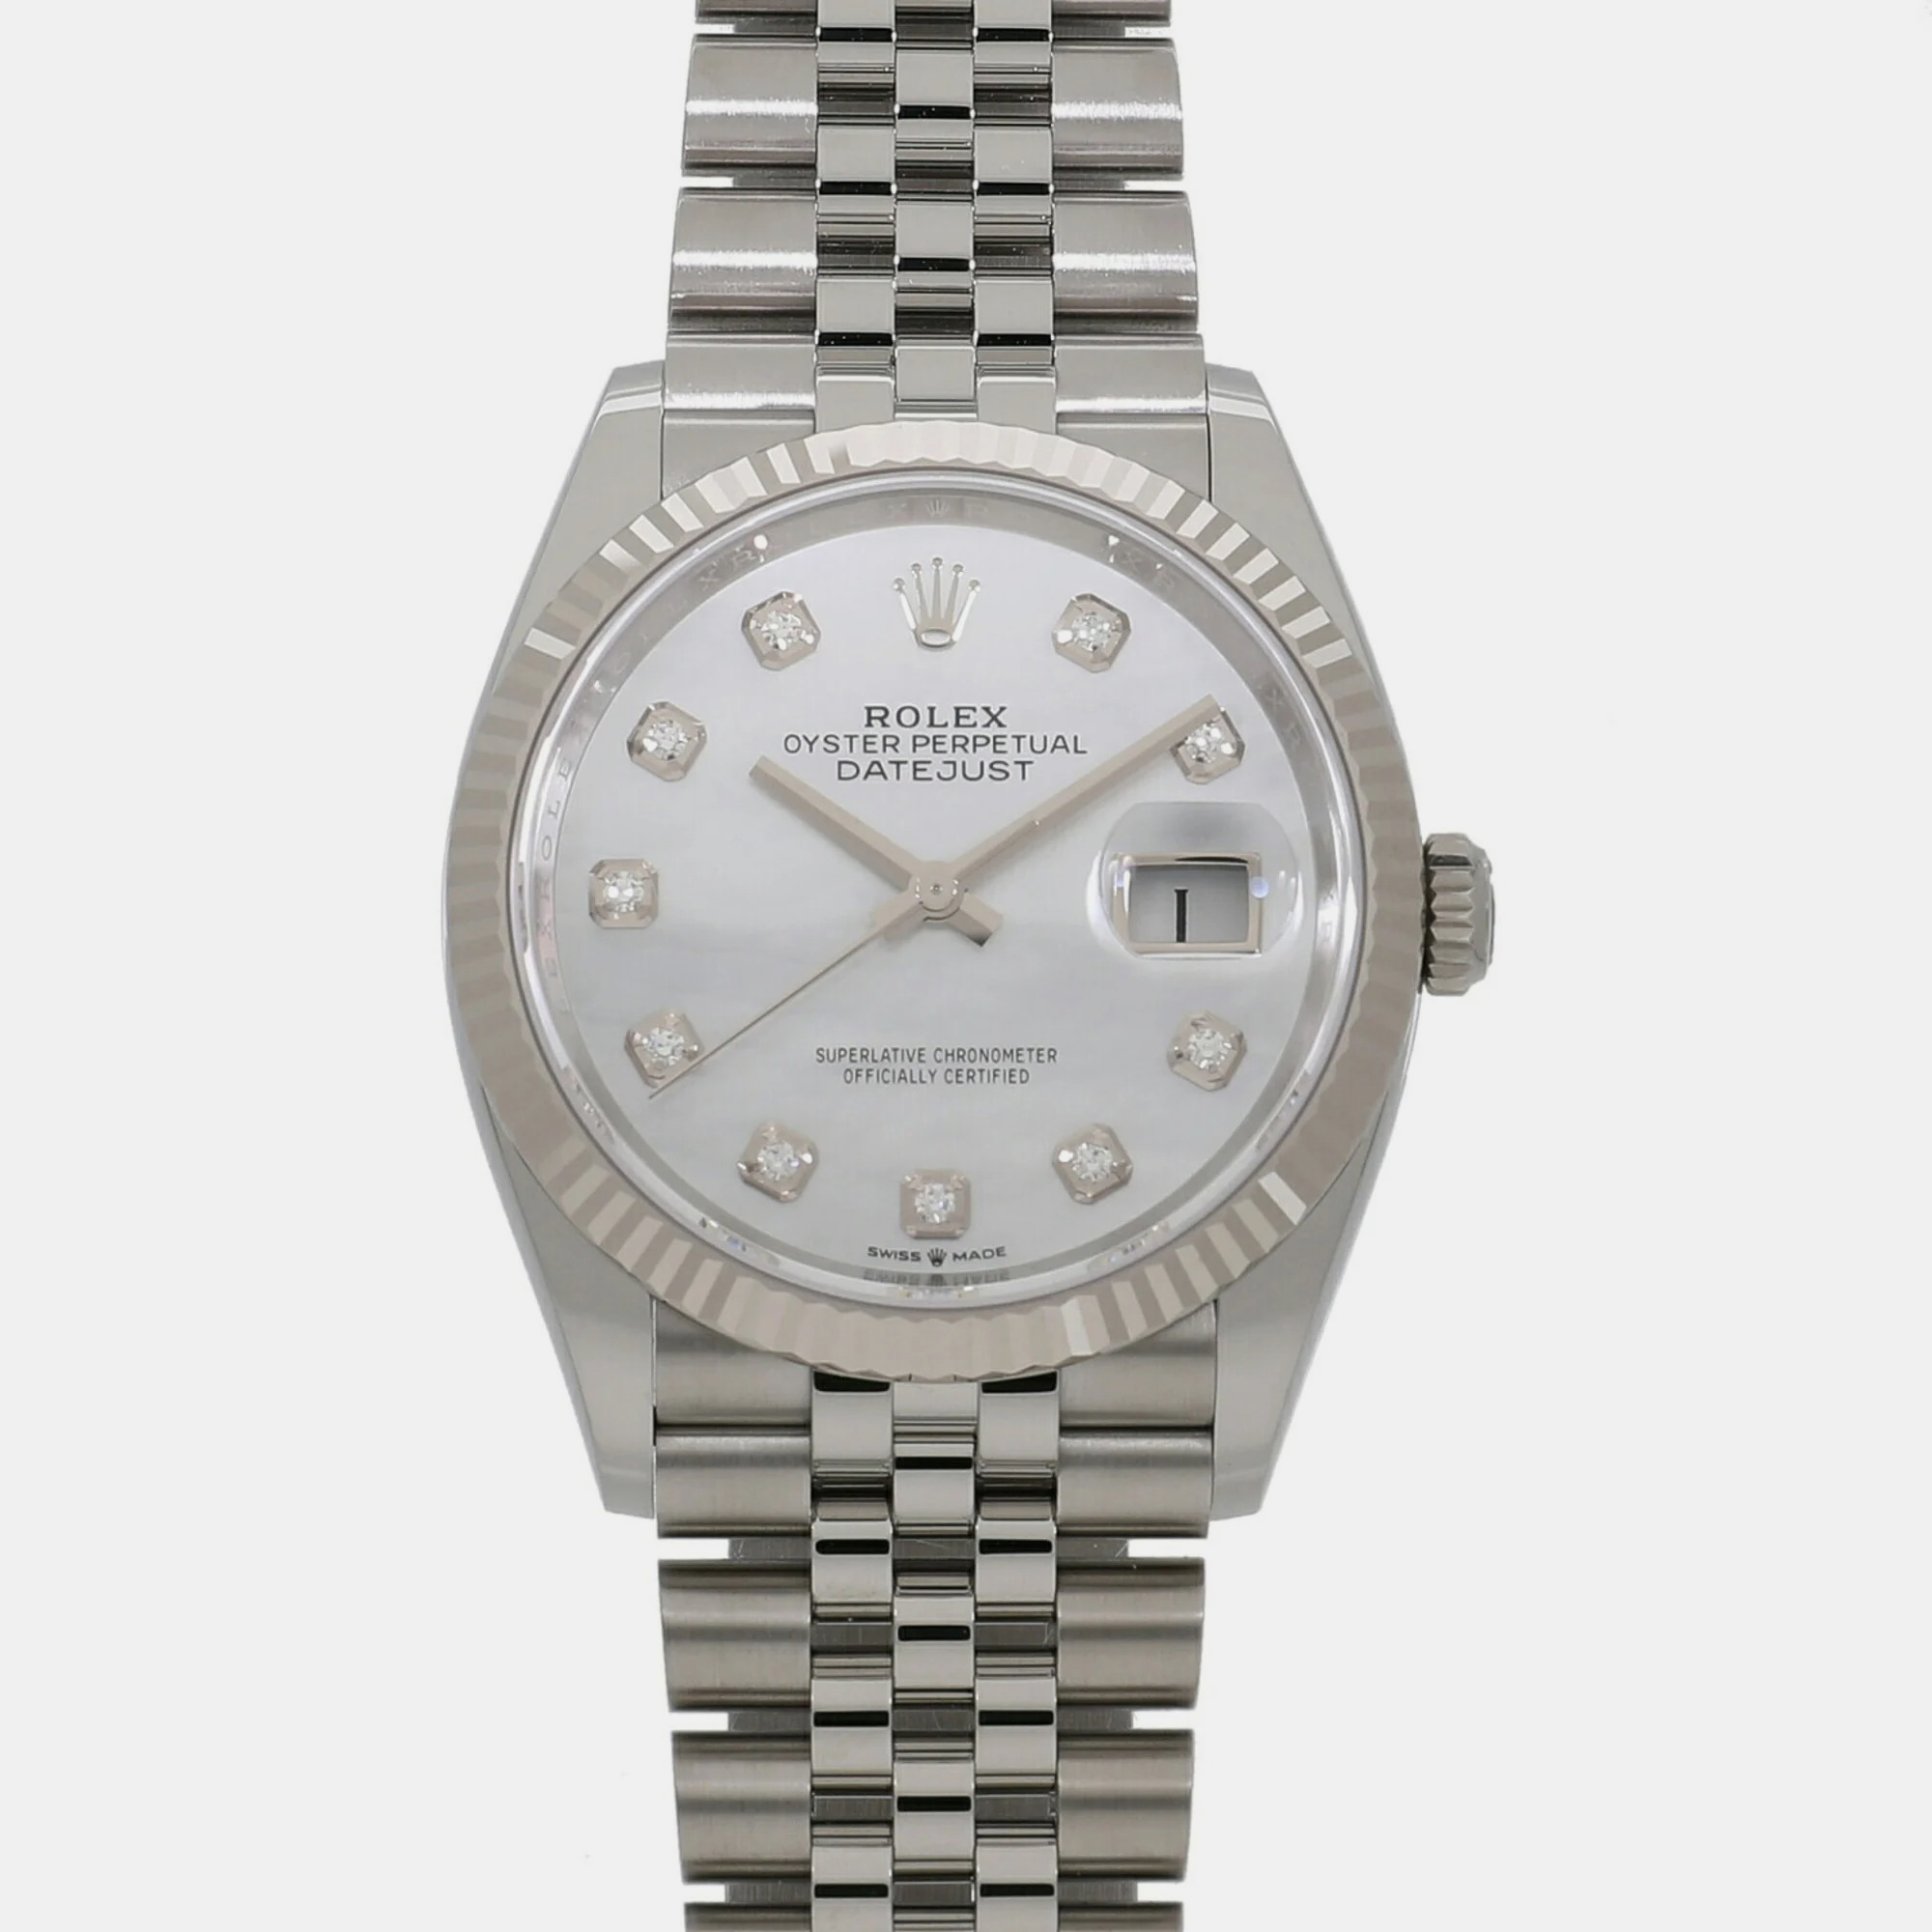 Rolex White Shell 18k White Gold And Stainless Steel Datejust 126234 Automatic Men's Wristwatch 36 Mm